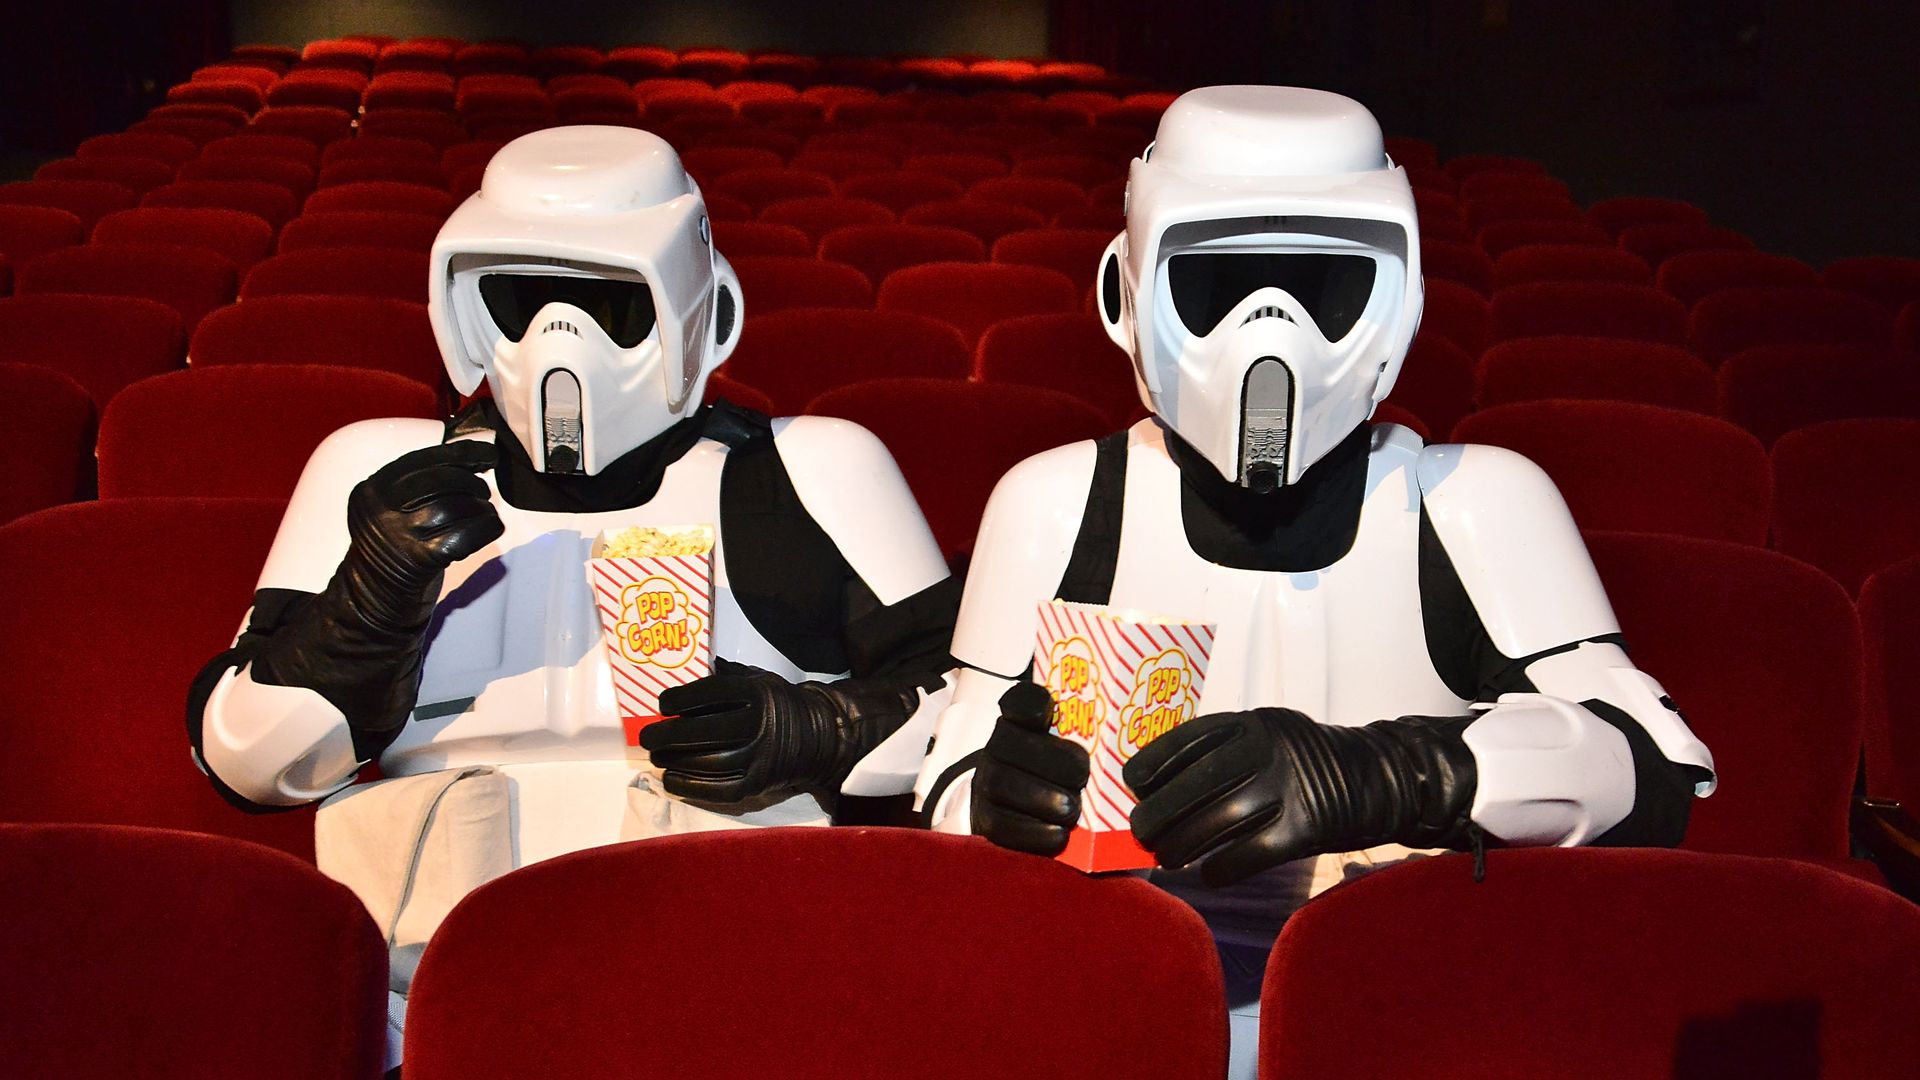 Two fans dressed as stormtroopers eat popcorn in movie theater seats